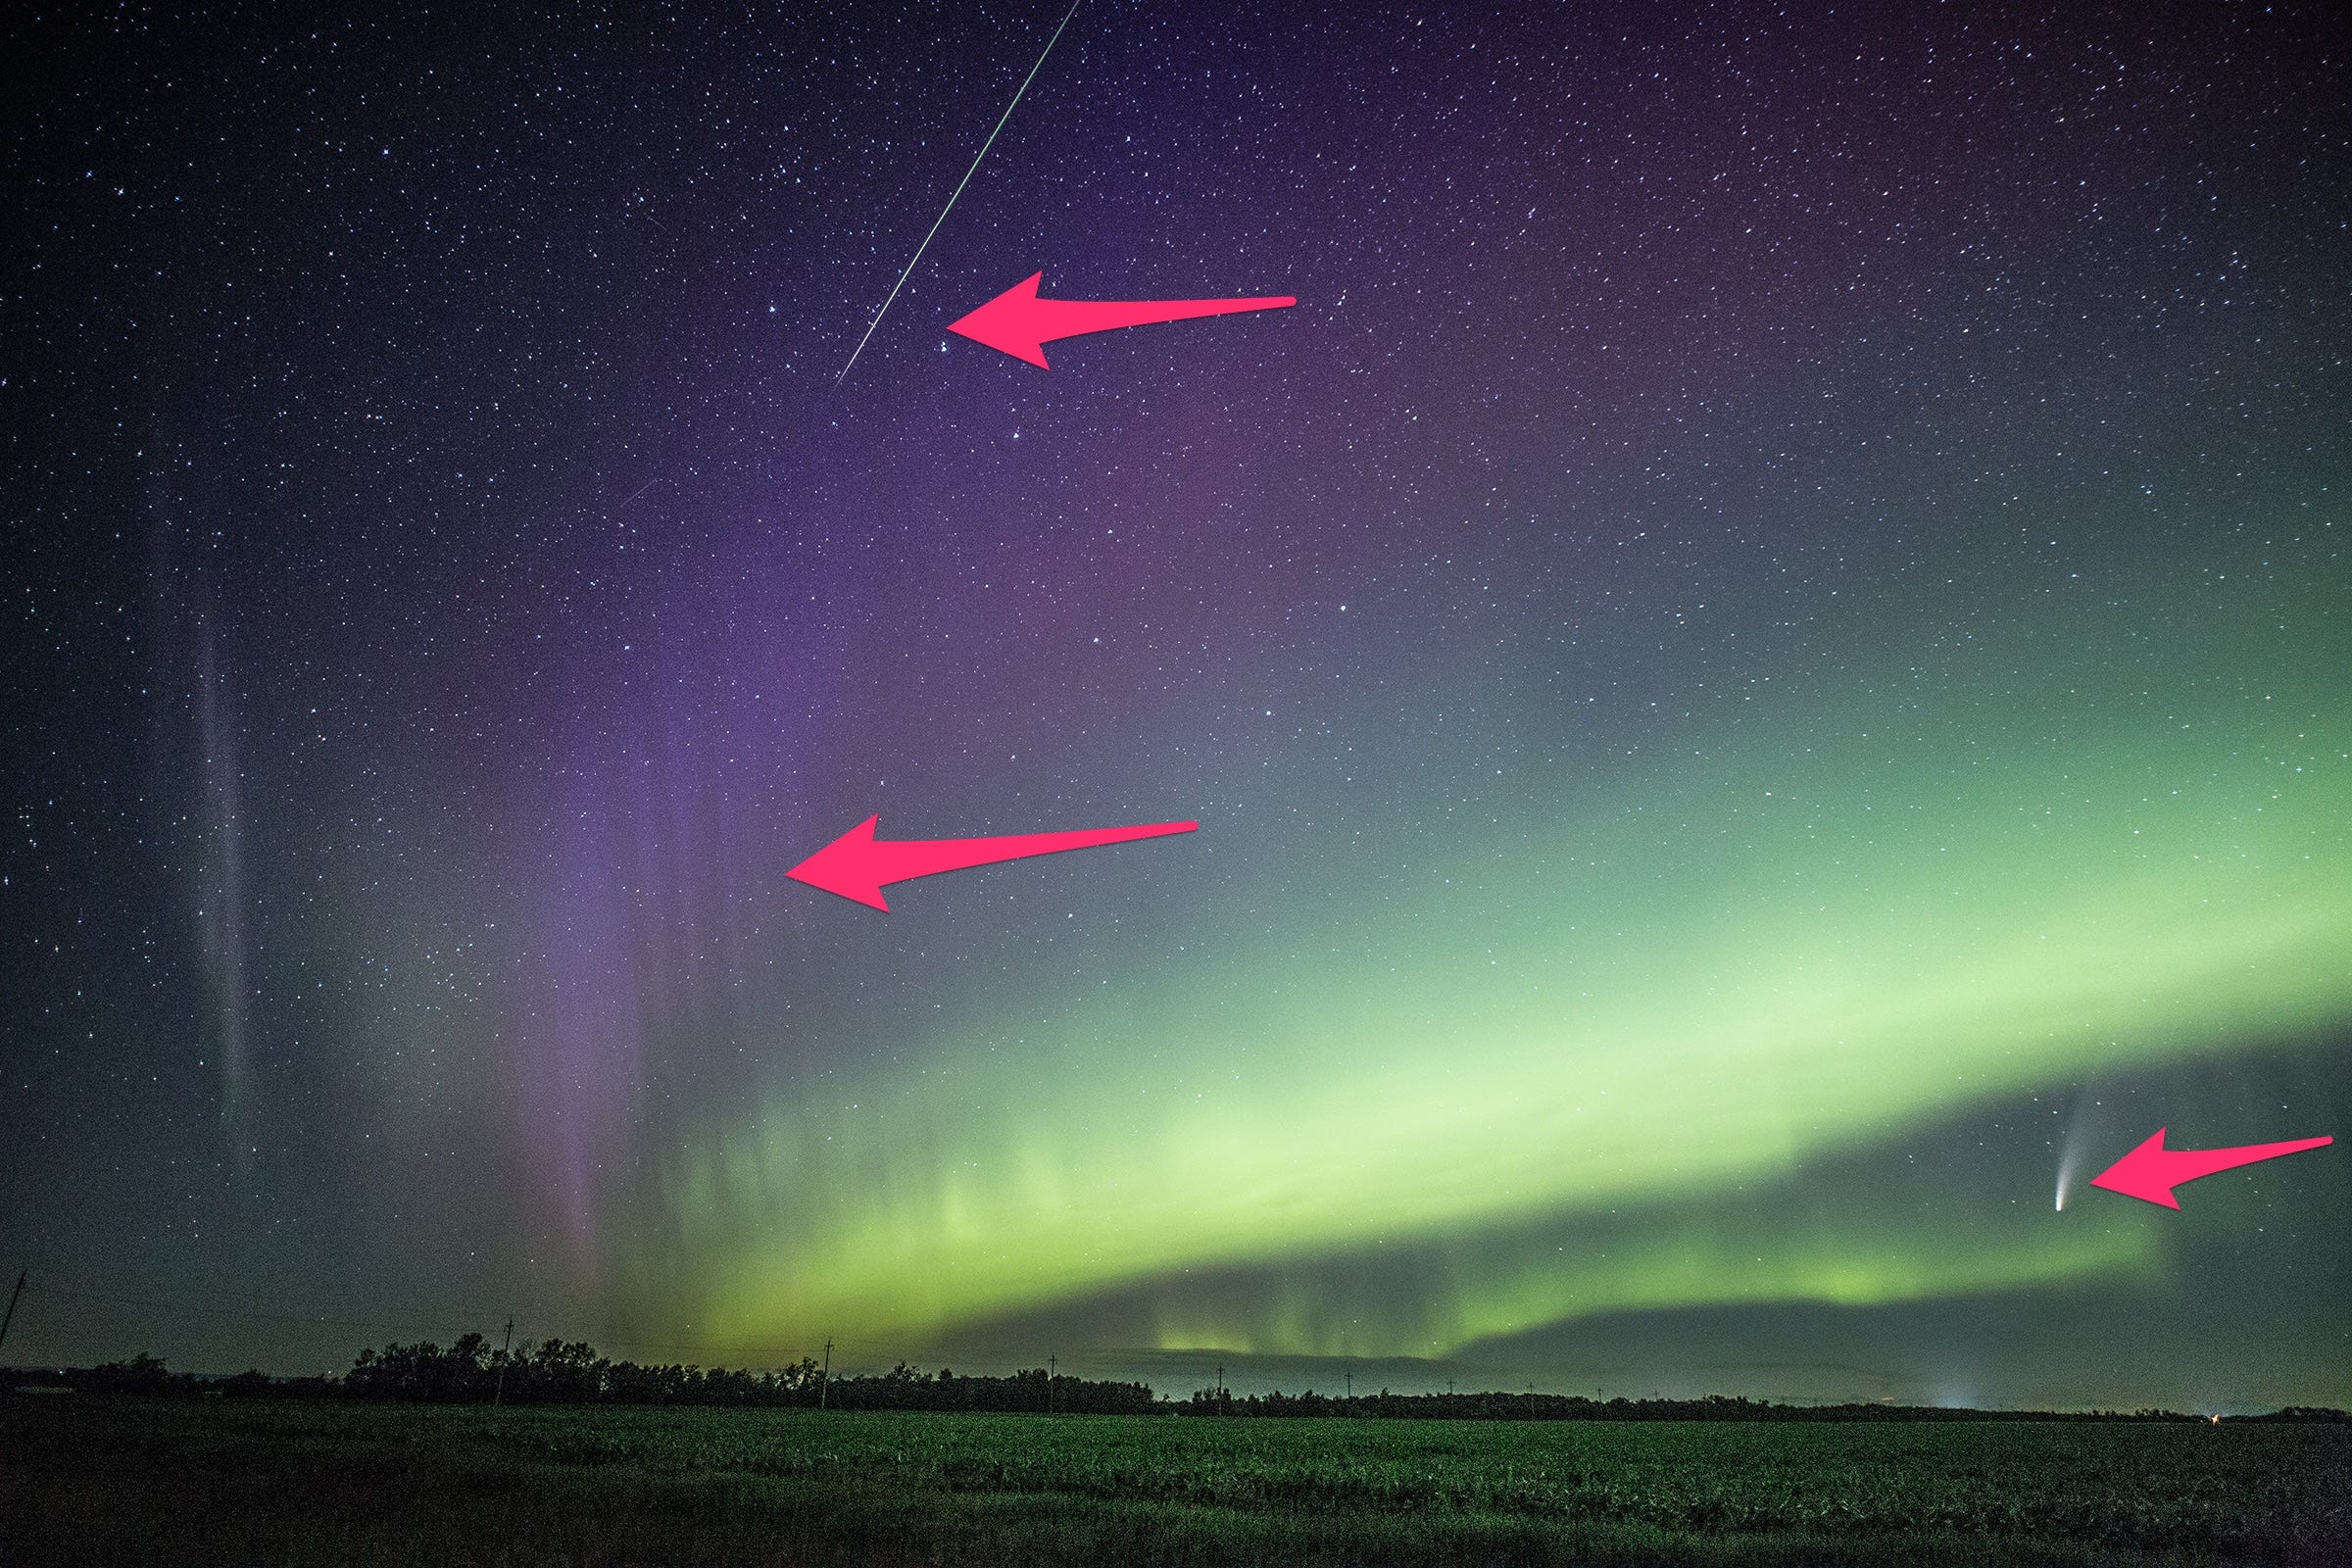 Arrows point to the meteor (top), STEVE (left), and Comet Neowise. (Donna Lach)